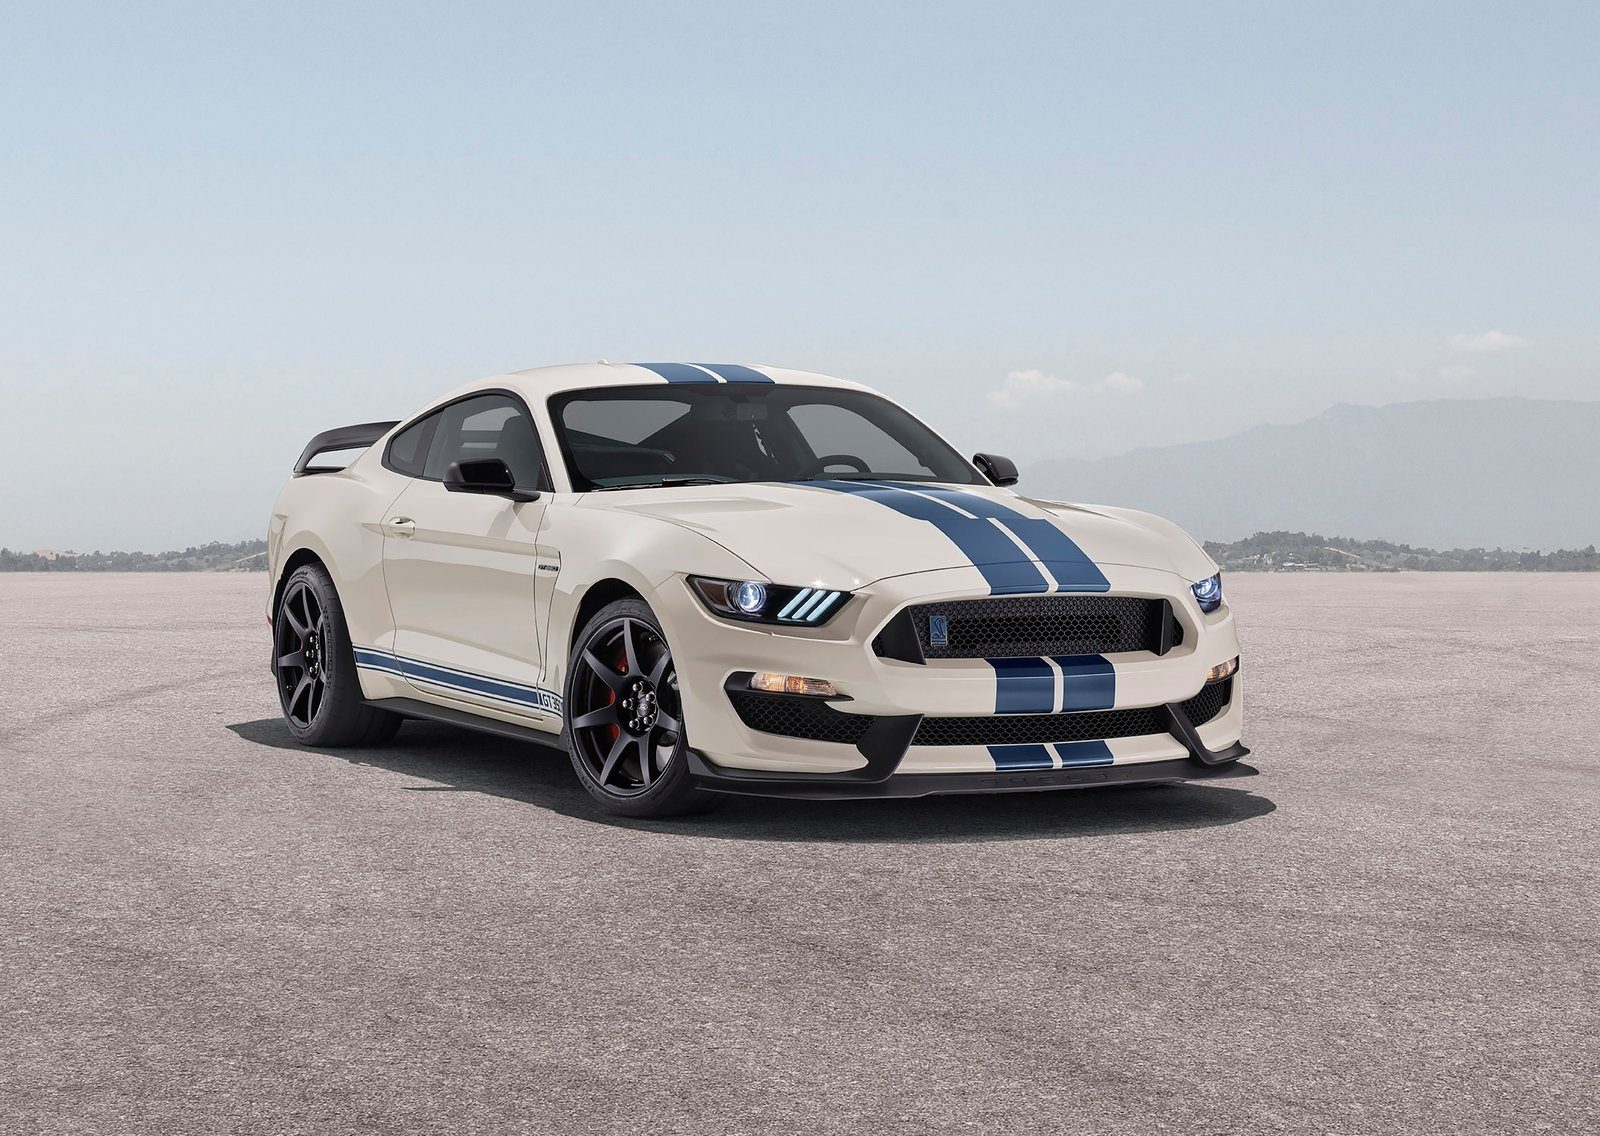 New 2020 Ford Mustang Shelby GT 350 & 350R Performance Sales  Brochure 